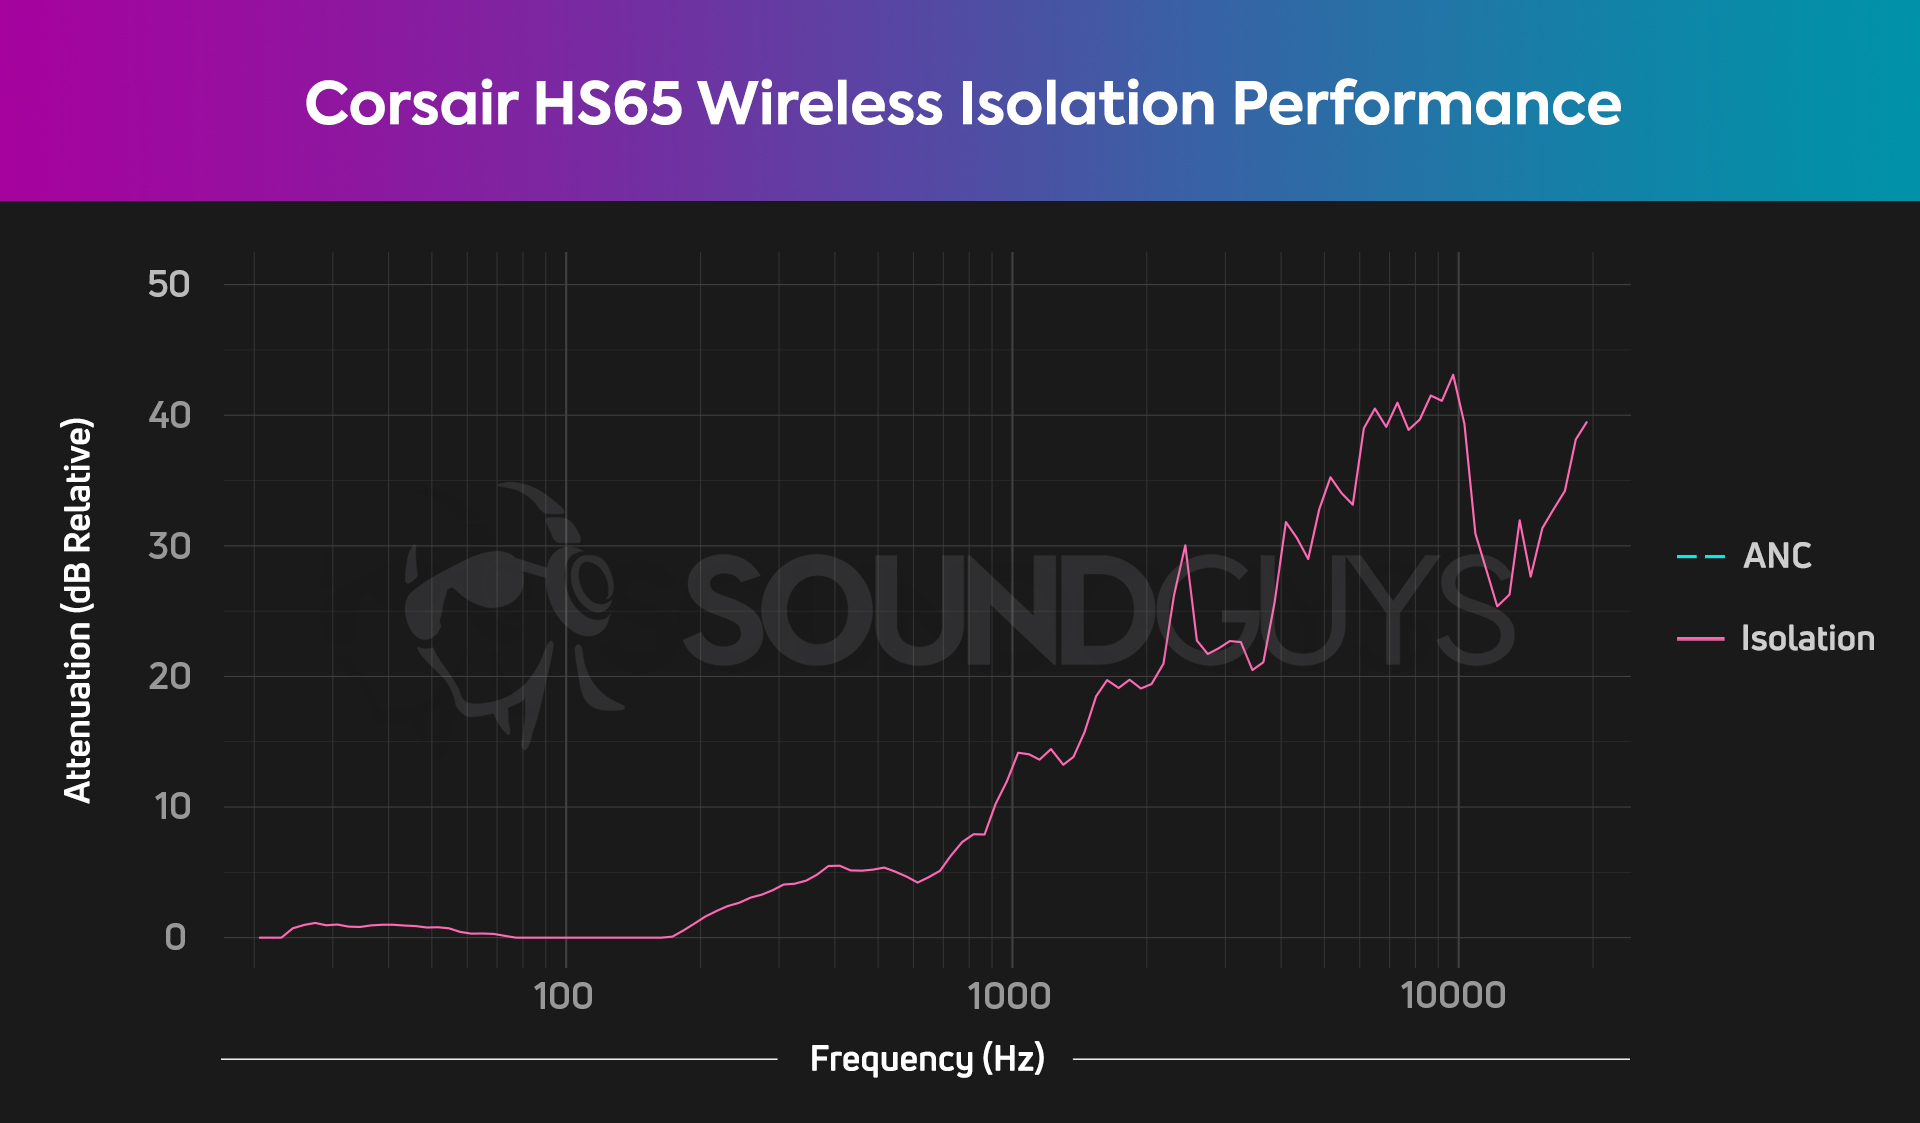 An isolation chart fro the Corsair HS65 Wireless, which shows good isolation.